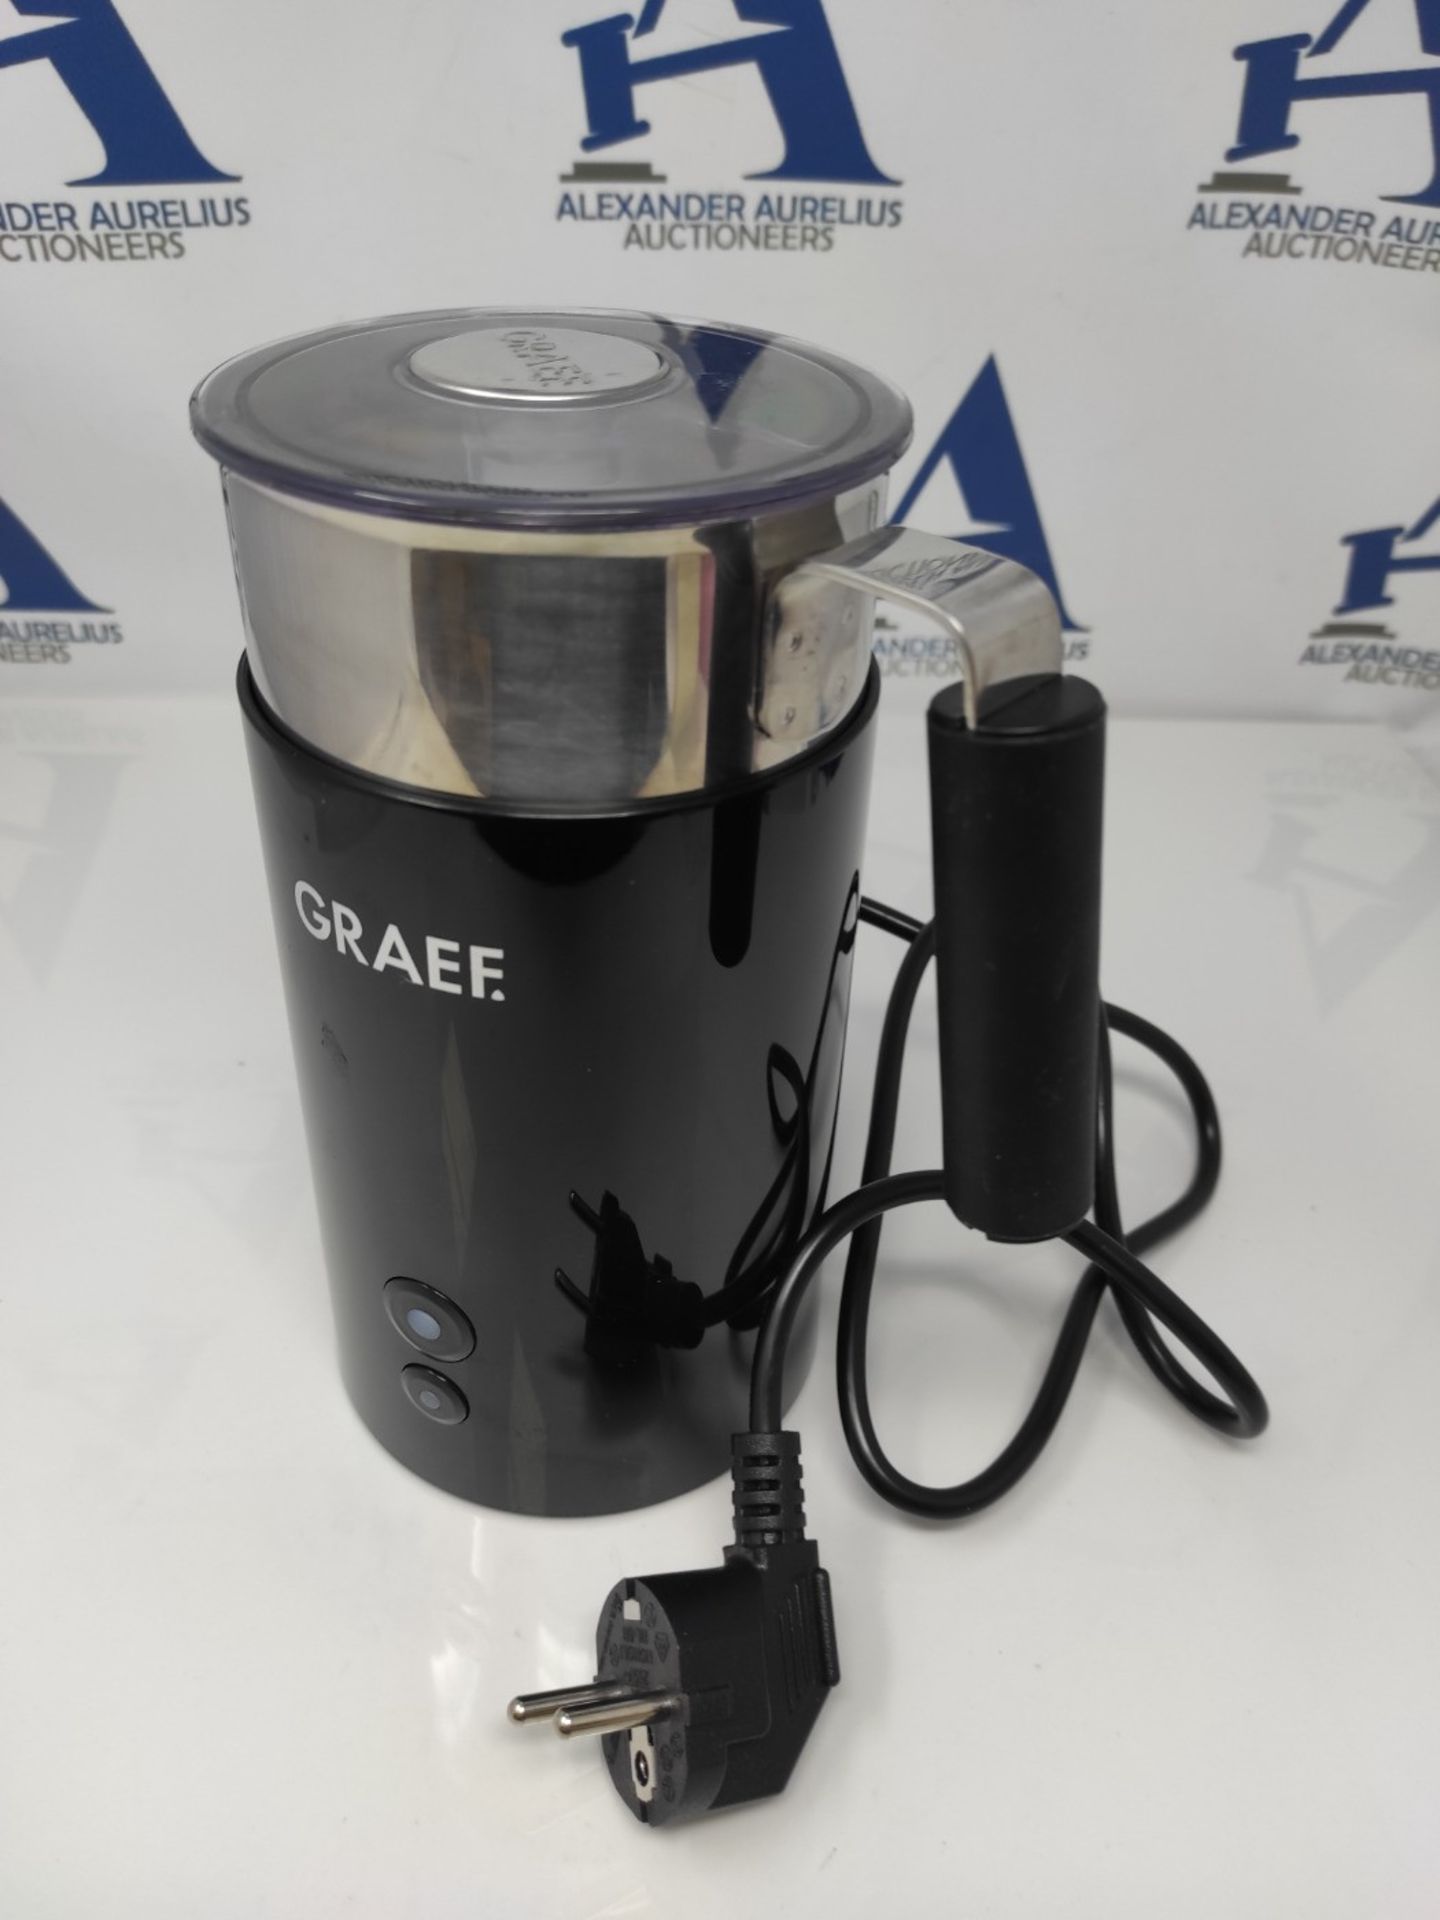 RRP £59.00 Graef MS702EU Milk Frother, 400 milliliters, black/stainless steel, 16.5 x 16.5 x 20.5 - Image 3 of 3